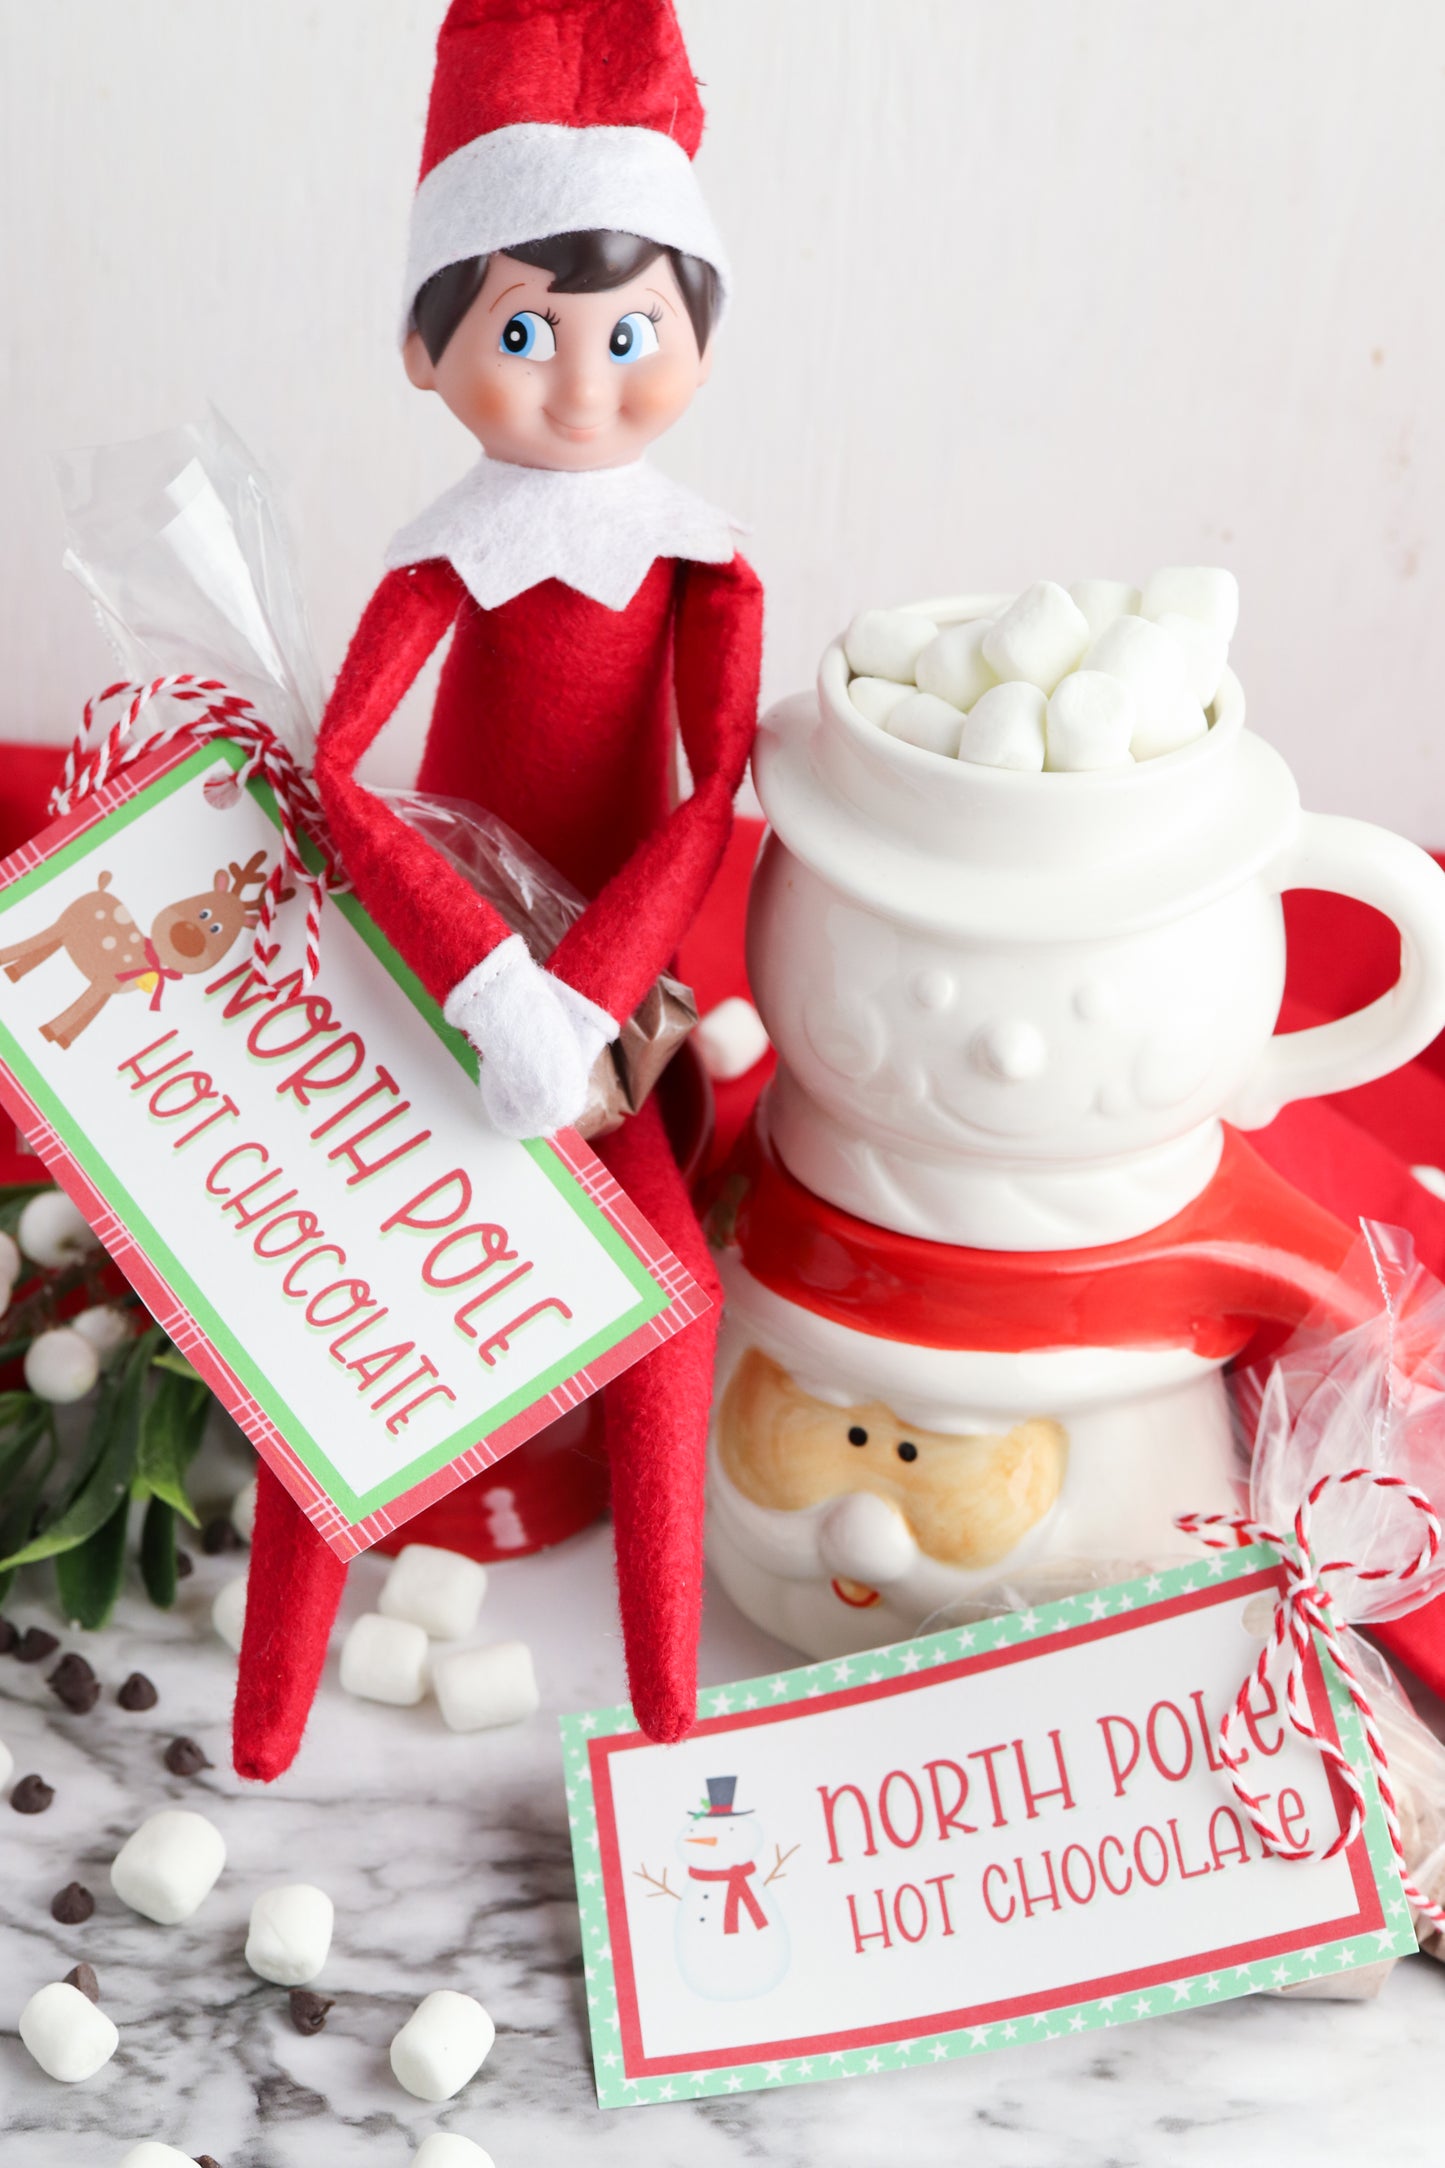 Elf On The Shelf Hot Chocolate and Let's Bake Cookies Printables